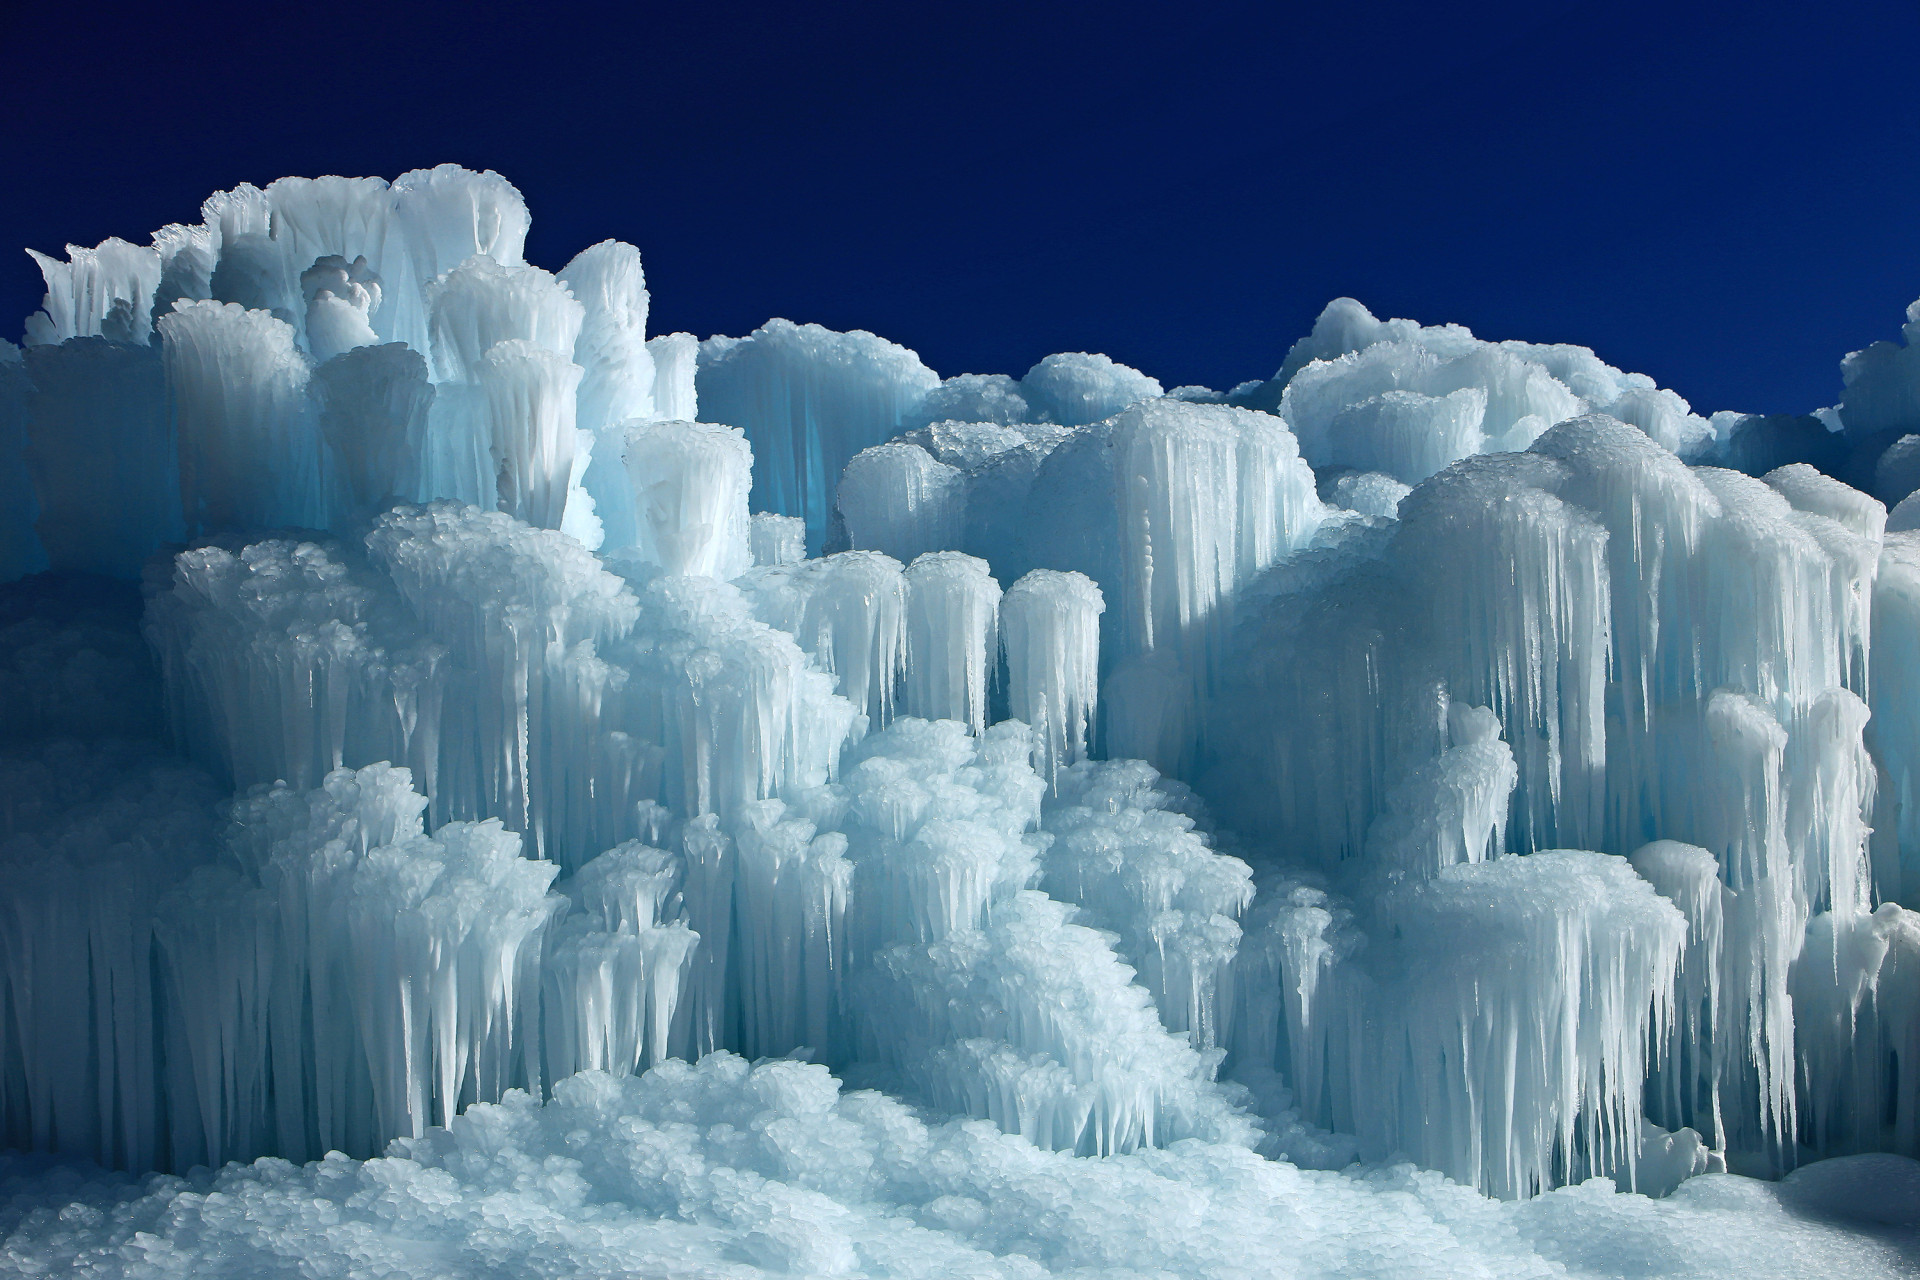 These otherworldly ice castles are made by artisans molding together thousands of icicles into spectacular sculptures which weigh approximately 25,000,000 lbs each. If you're a 'Frozen' fan, be sure to snap a picture with the landmark's ice princesses.<p>You may also like:<a href="https://www.starsinsider.com/n/439582?utm_source=msn.com&utm_medium=display&utm_campaign=referral_description&utm_content=247050v5en-us"> The best advice from celebrity makeup artists</a></p>